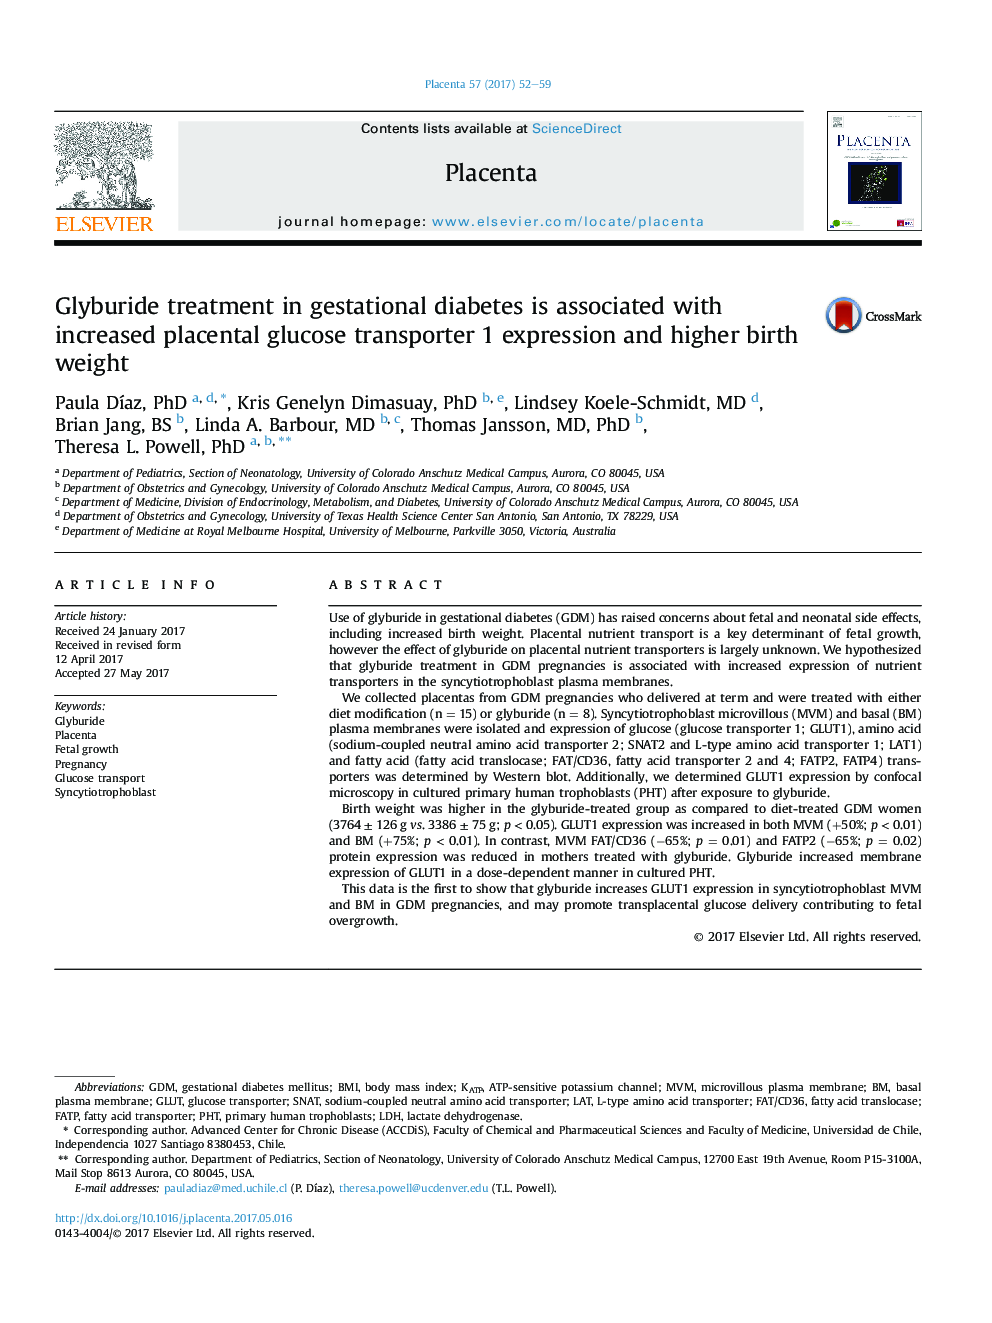 Glyburide treatment in gestational diabetes is associated with increased placental glucose transporter 1 expression and higher birth weight